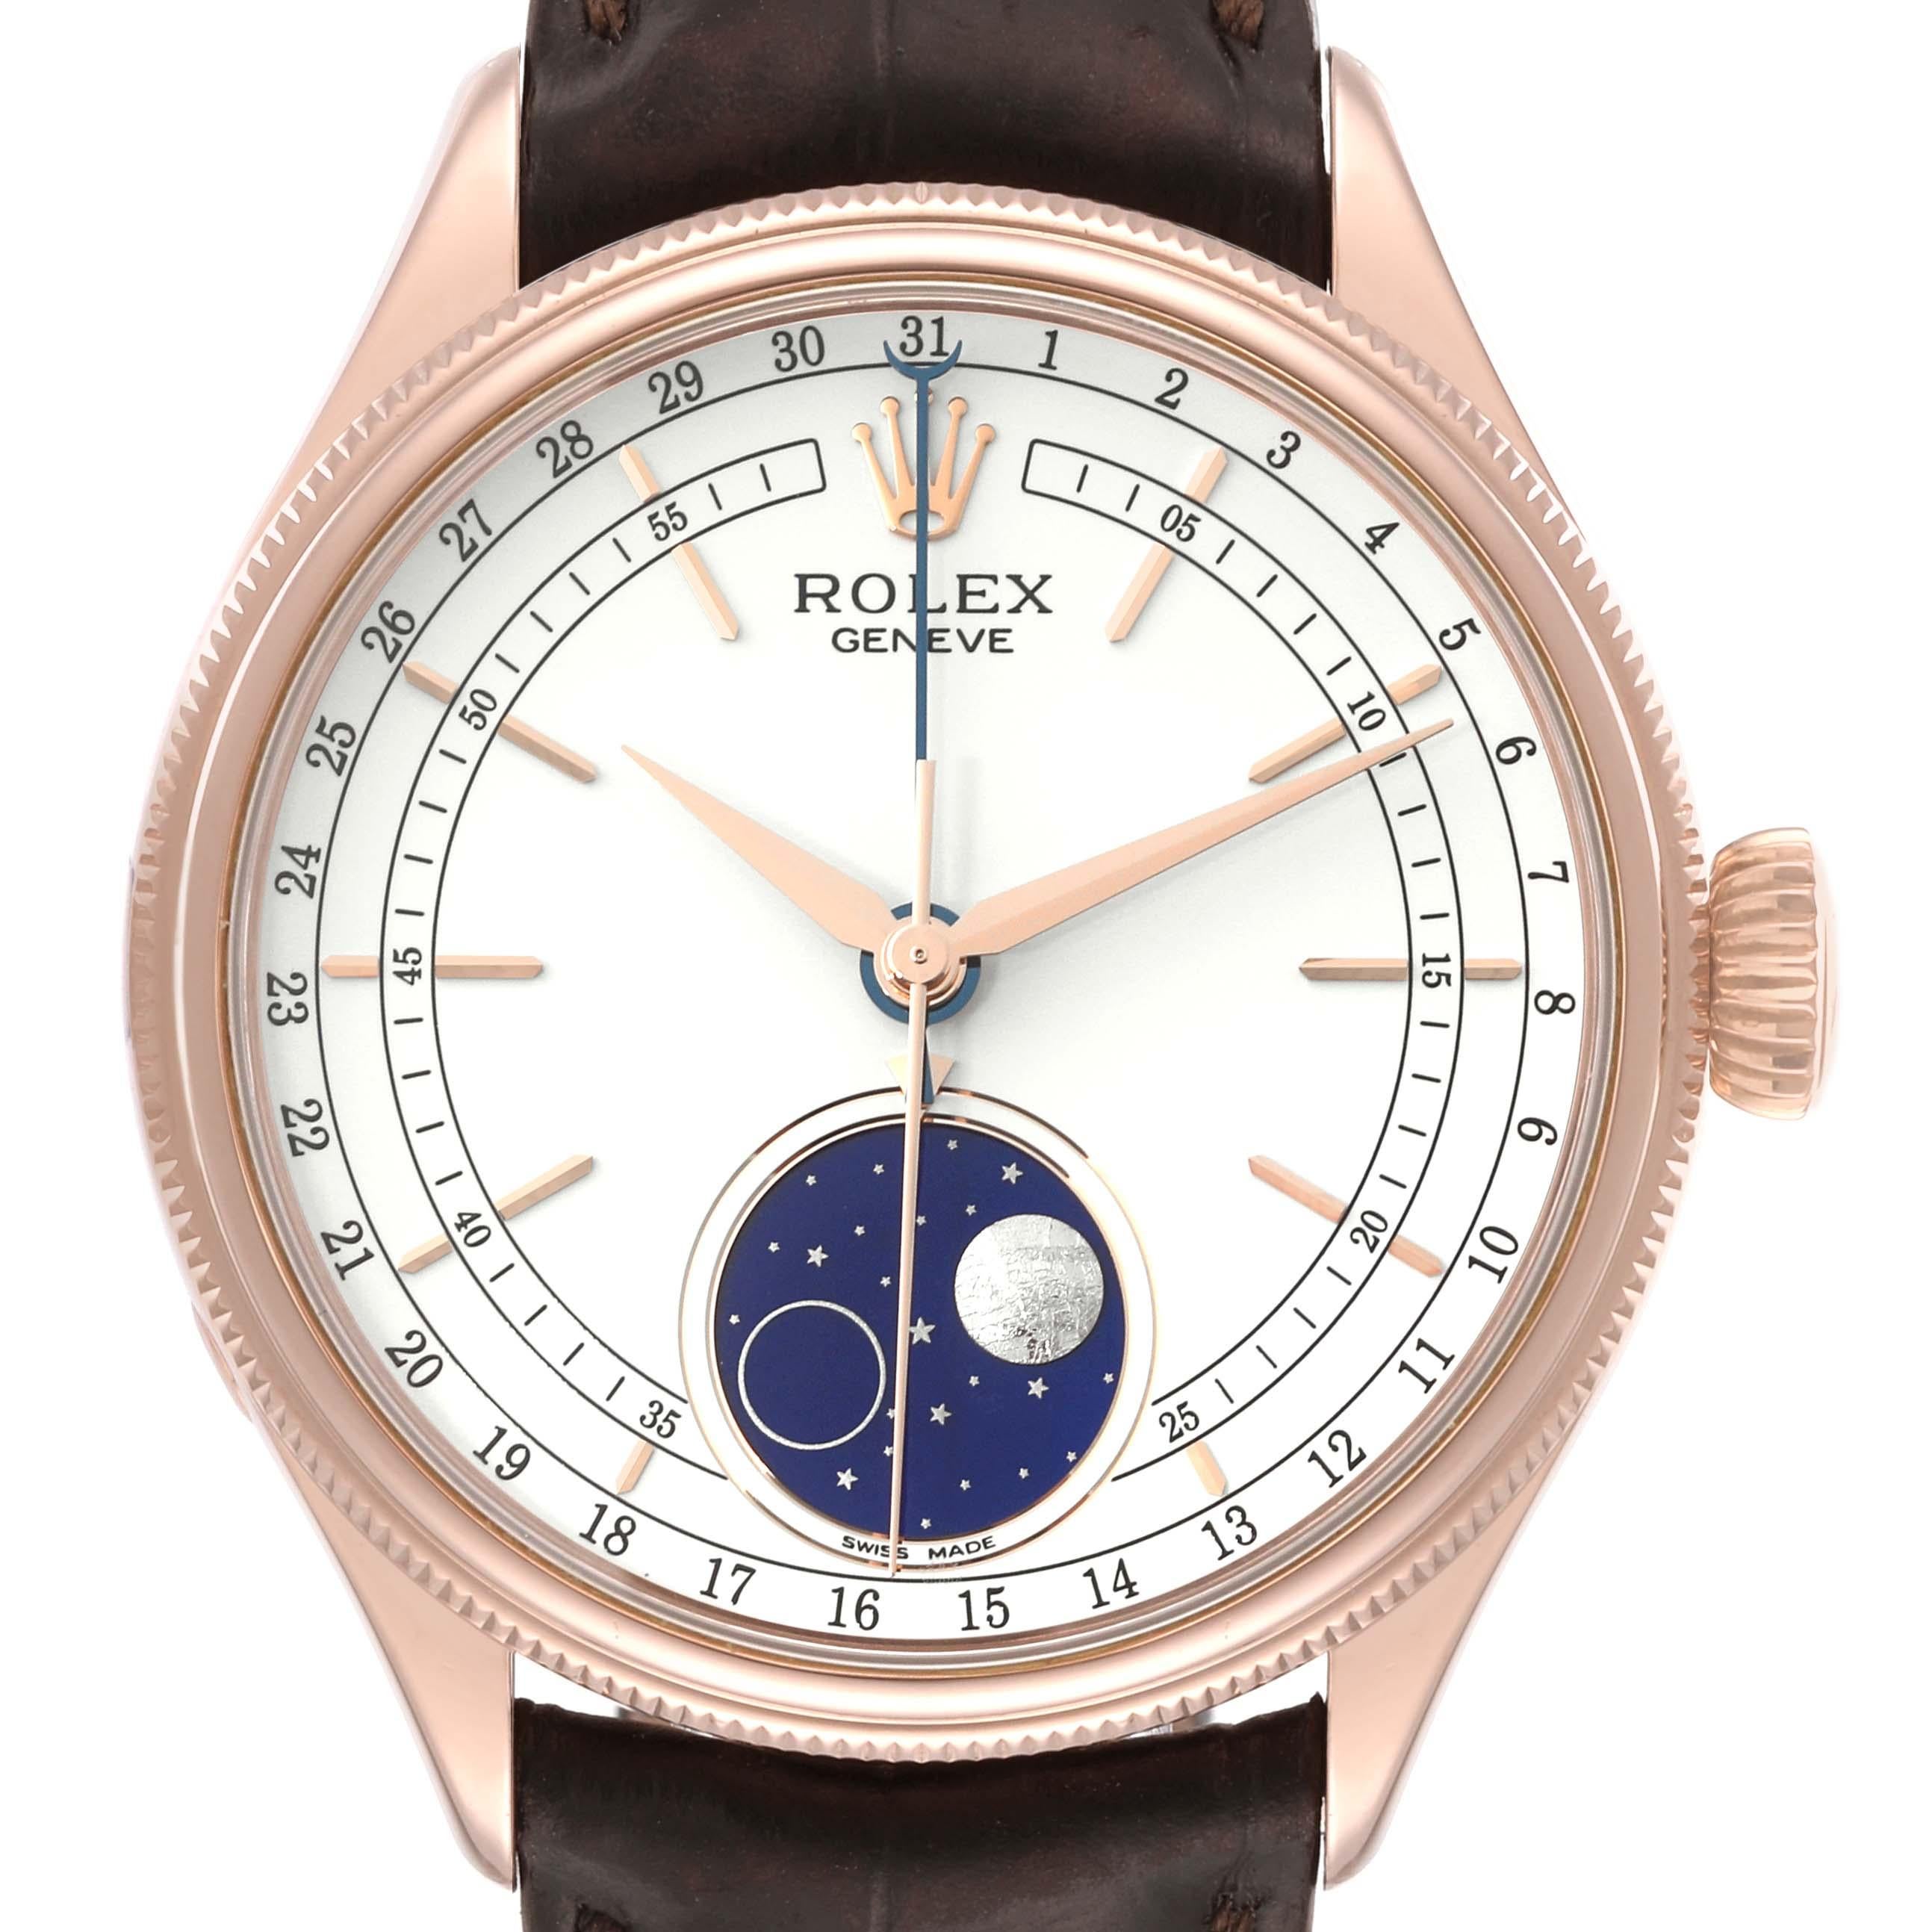 Rolex Cellini Moonphase White Dial Rose Gold Mens Watch 50535 Box Card. Automatic self-winding movement. Officially certified Swiss chronometer (COSC). Paramagnetic blue Parachrom hairspring. Bidirectional self-winding via Perpetual rotor. 18K